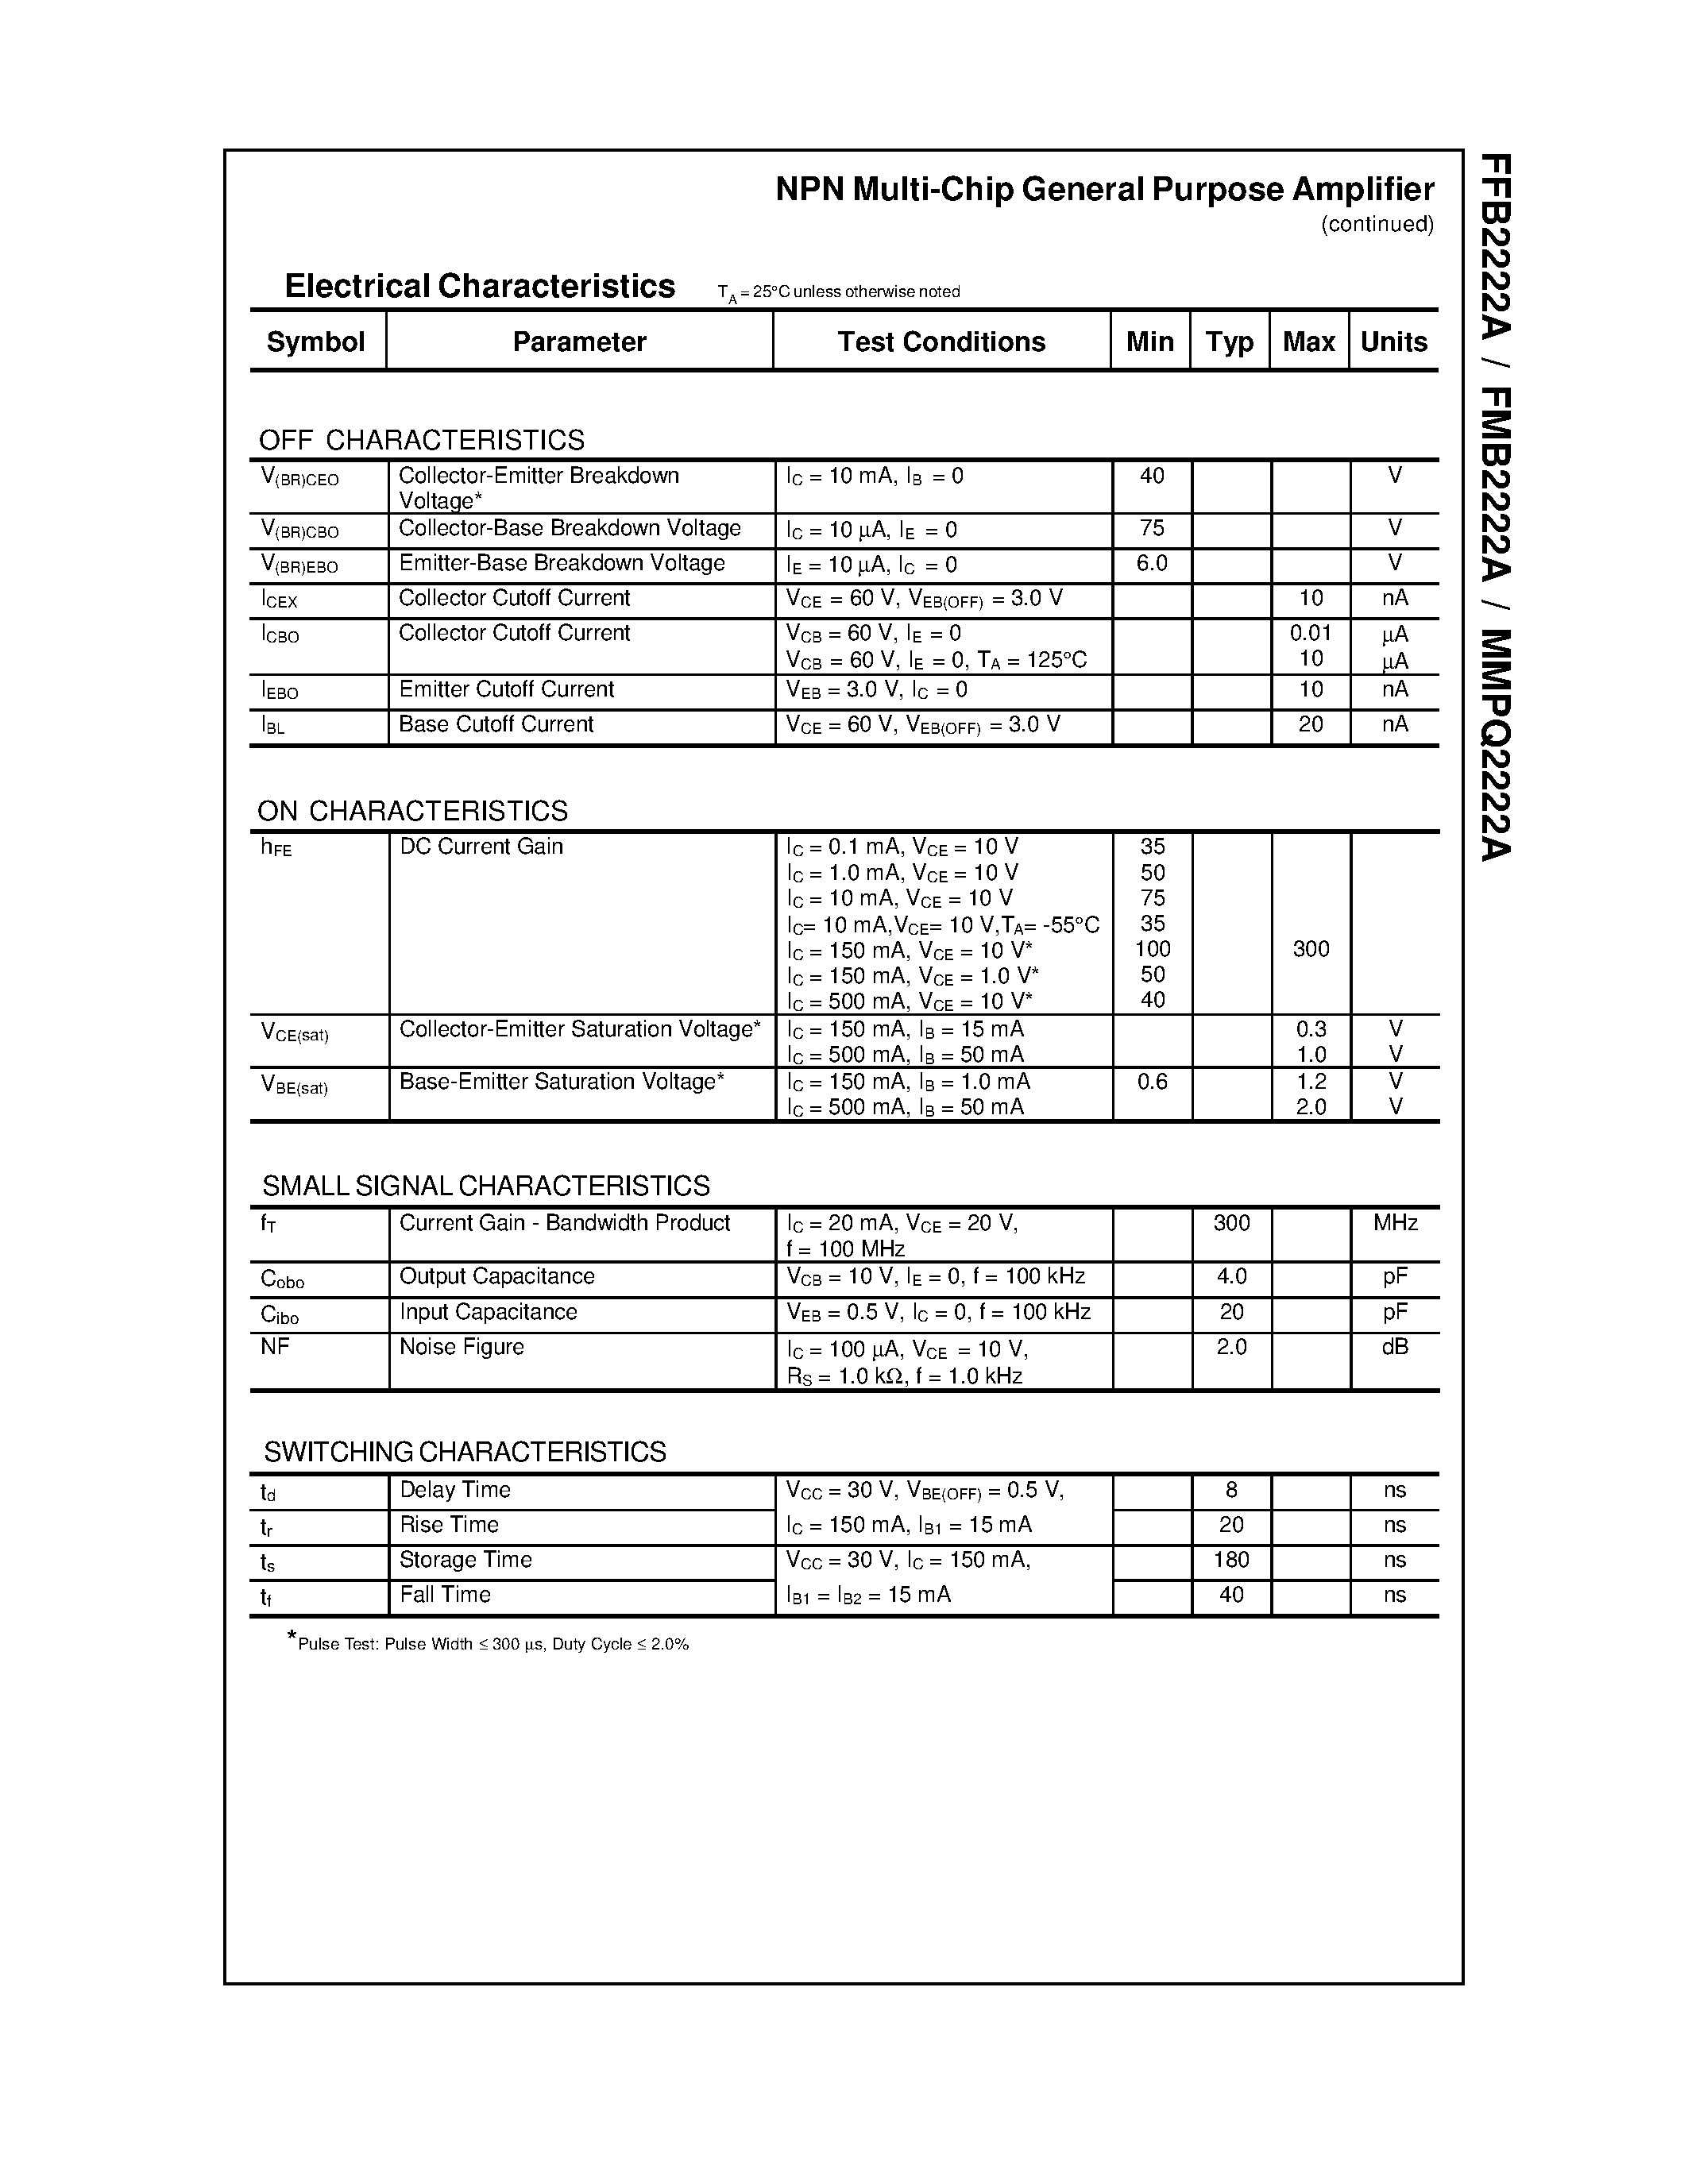 Datasheet FMB2222A - NPN Multi-Chip General Purpose Amplifier page 2